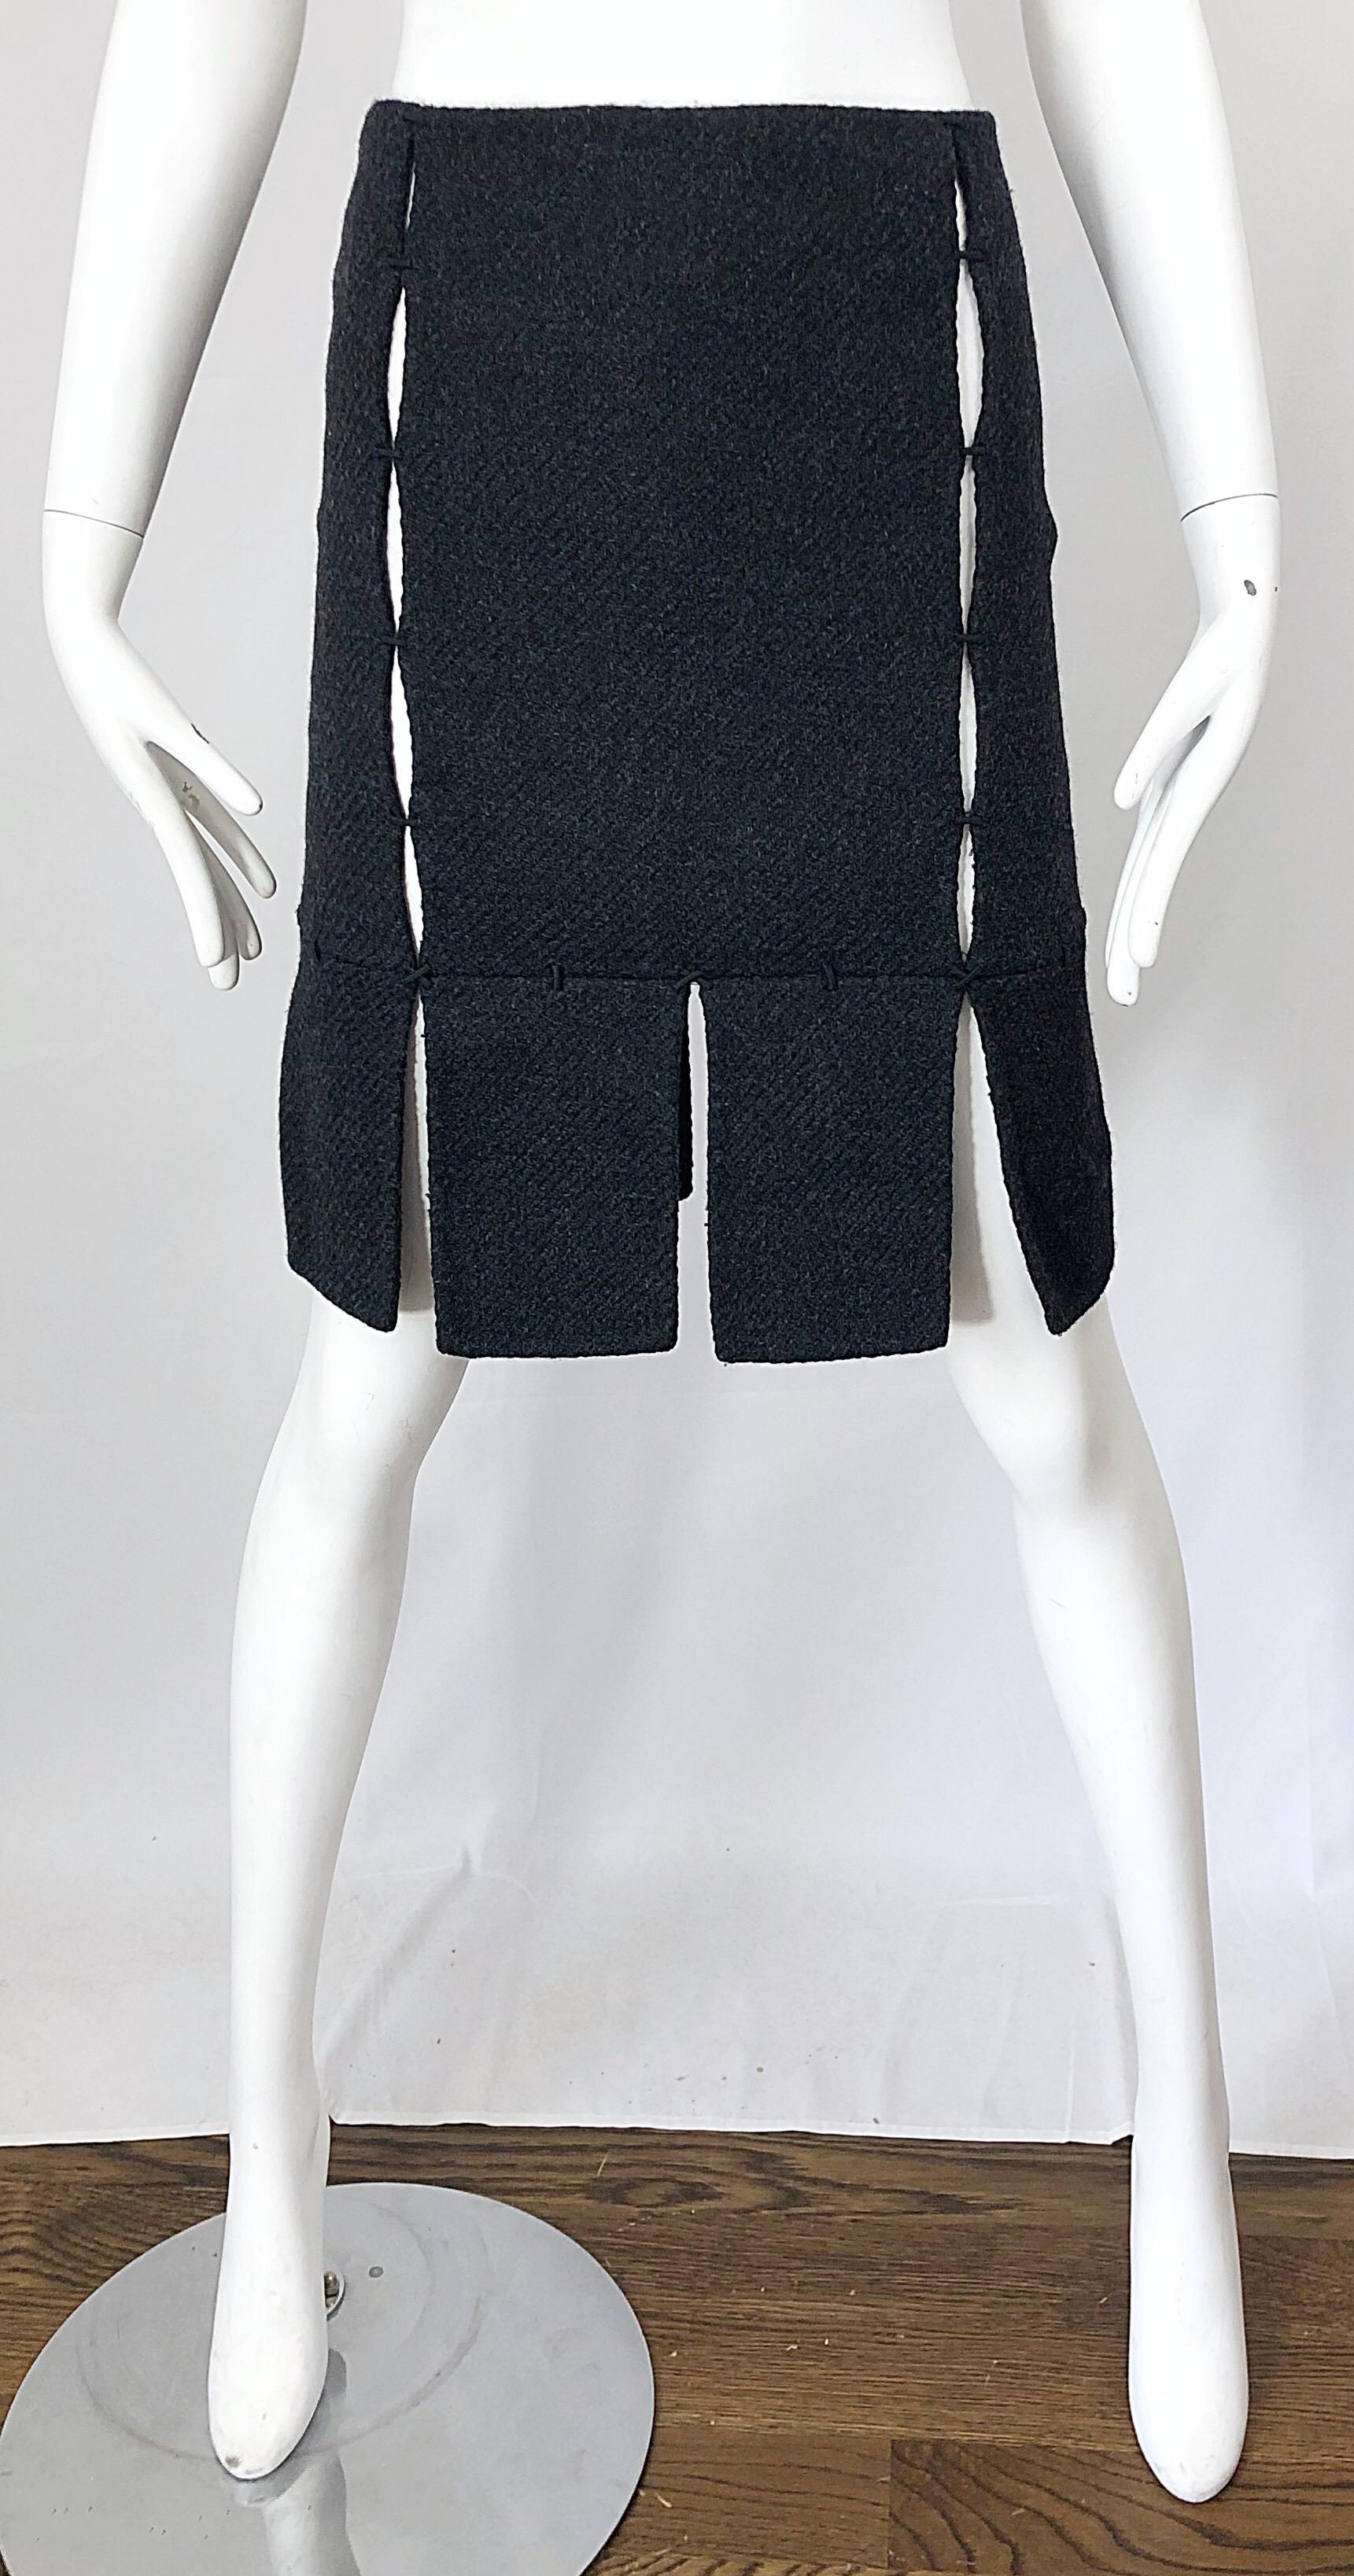 Rare late 90s PRADA charcoal gray cut-out high waisted wool pencil skirt! Features panels of wool stitched together to reveal just the right amount of skin. Chic car wash hem. Hidden zipper up the side with hook-and-eye closure. Can easily be